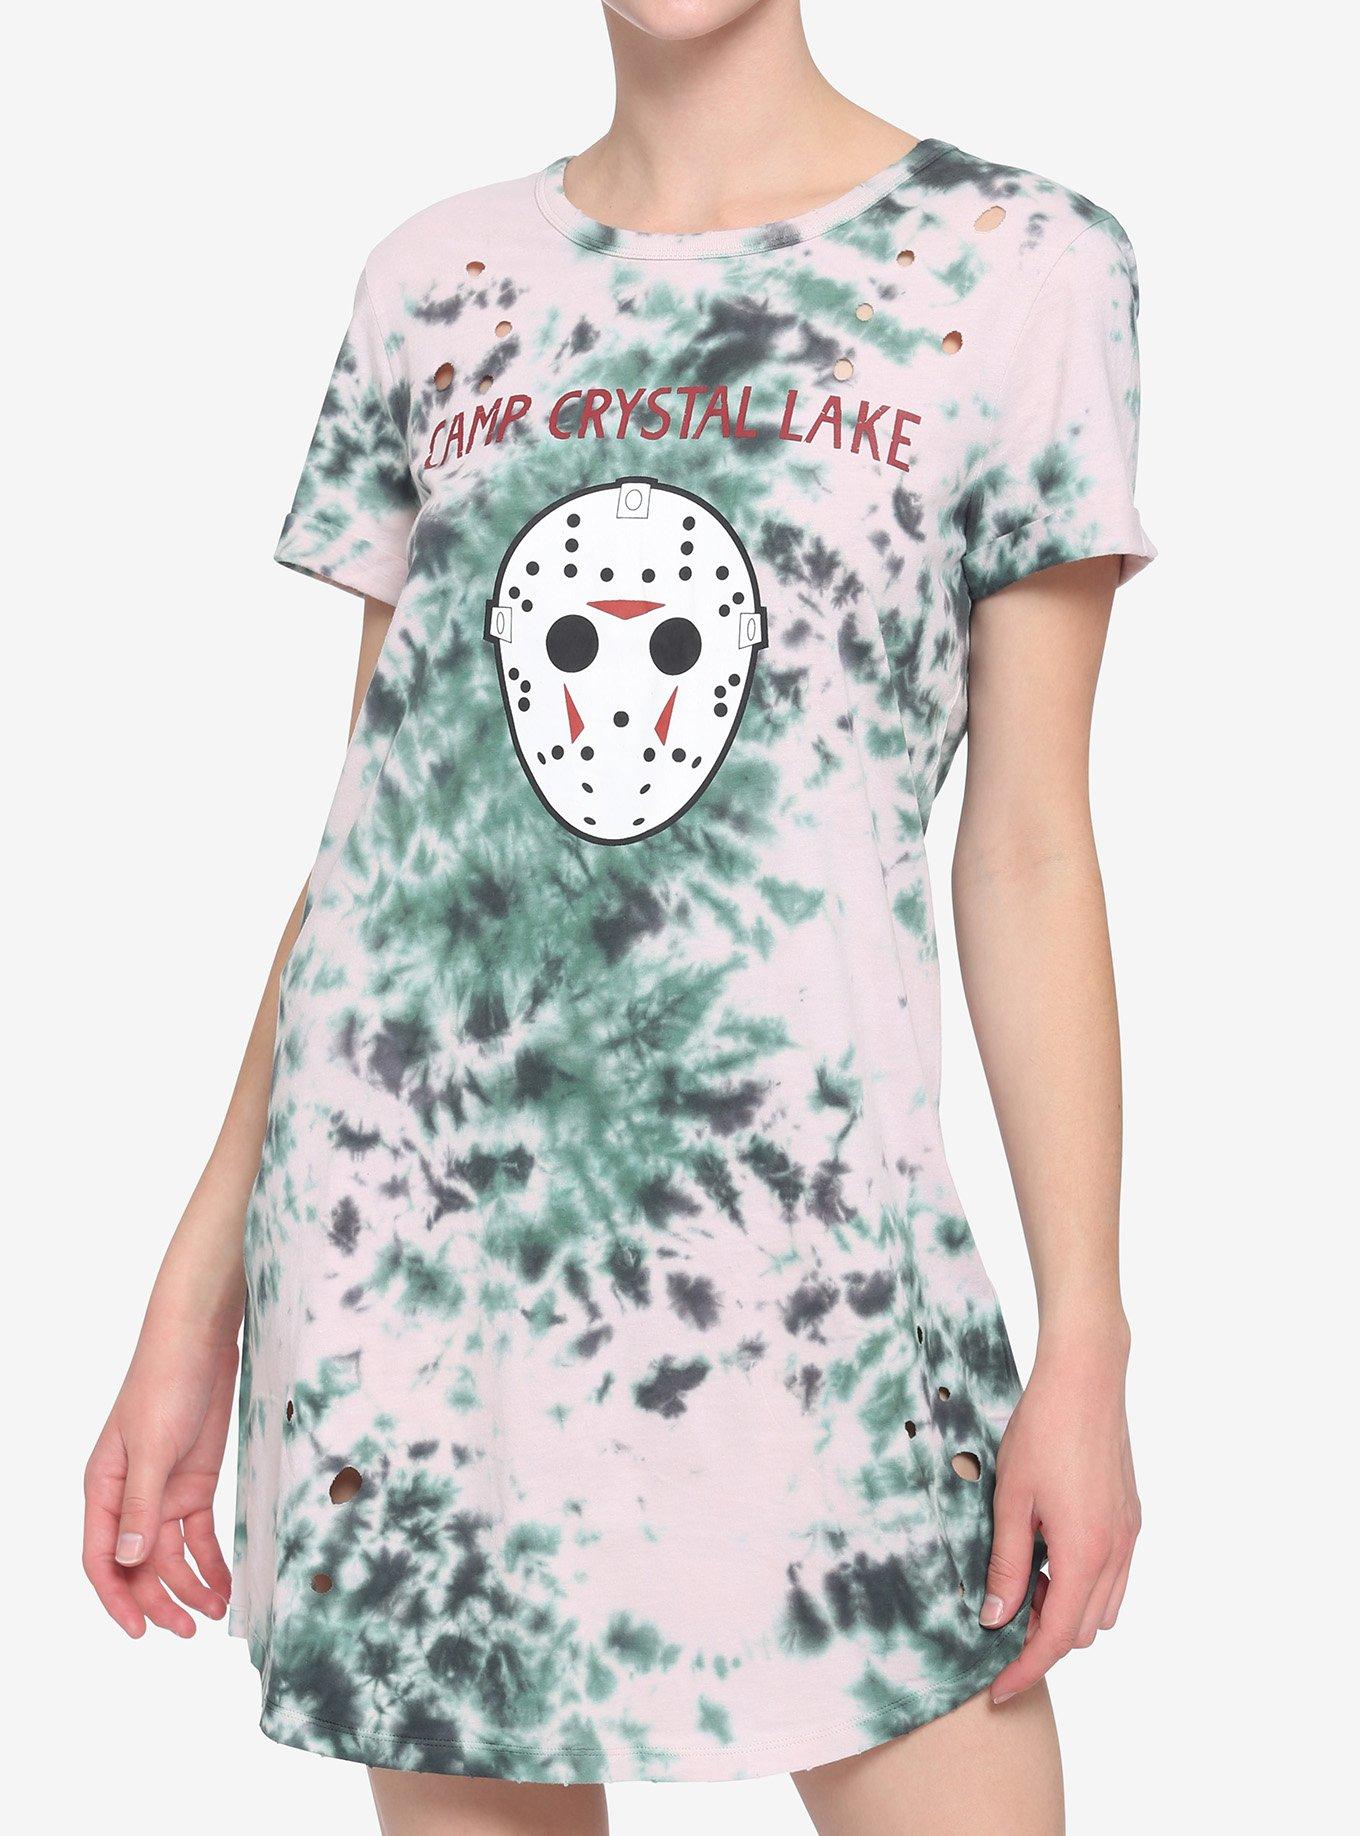 Friday The 13th Camp Crystal Lake Distressed Tie-Dye T-Shirt Dress, MULTI, hi-res